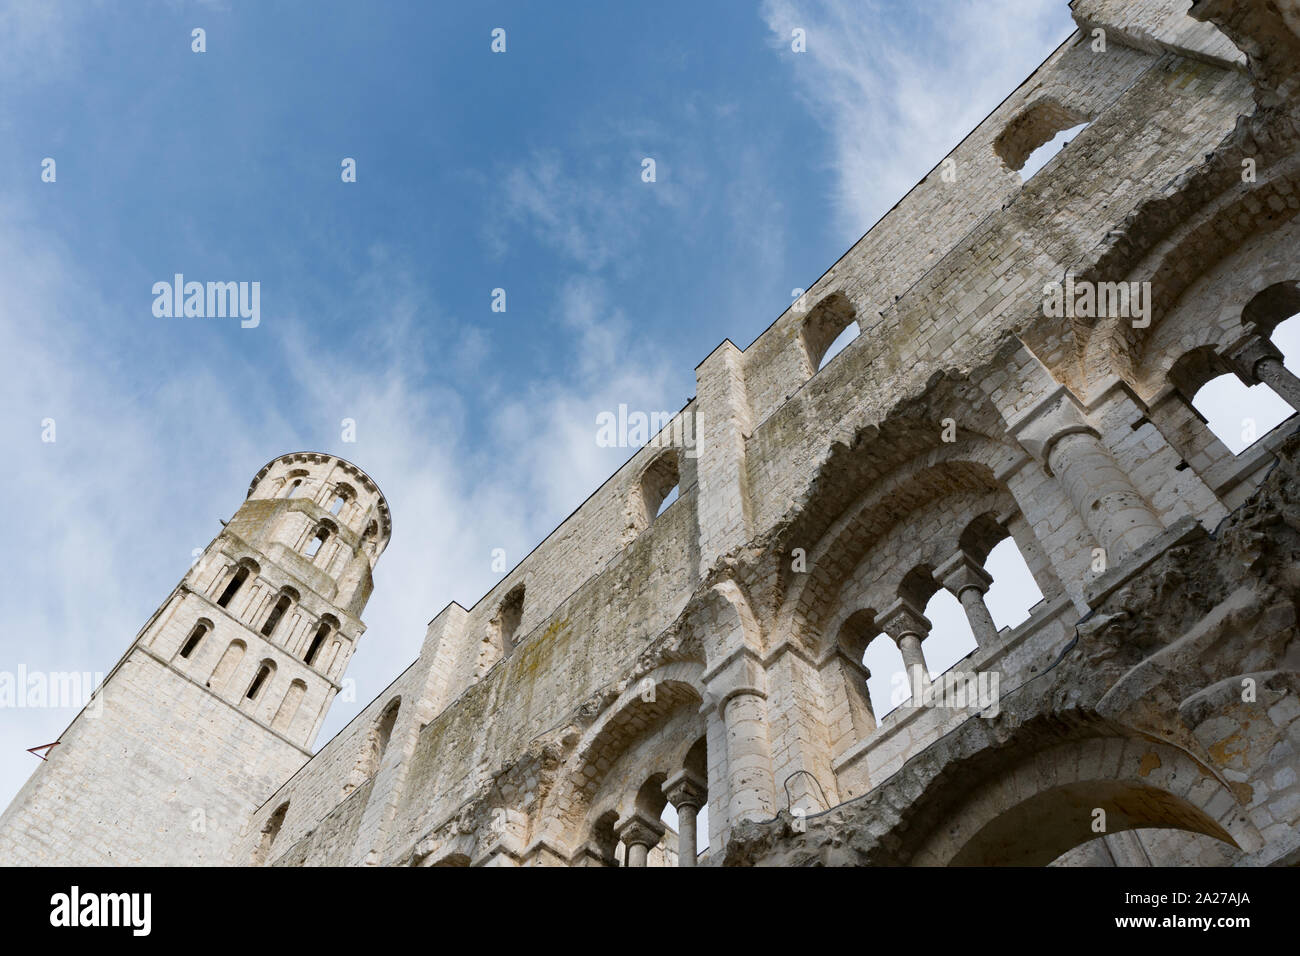 Jumieges, Normandy / France - 13 August 2019: detail view of the ruins of the old abbey and Benedictine monastery at Jumieges in Normandy in France Stock Photo